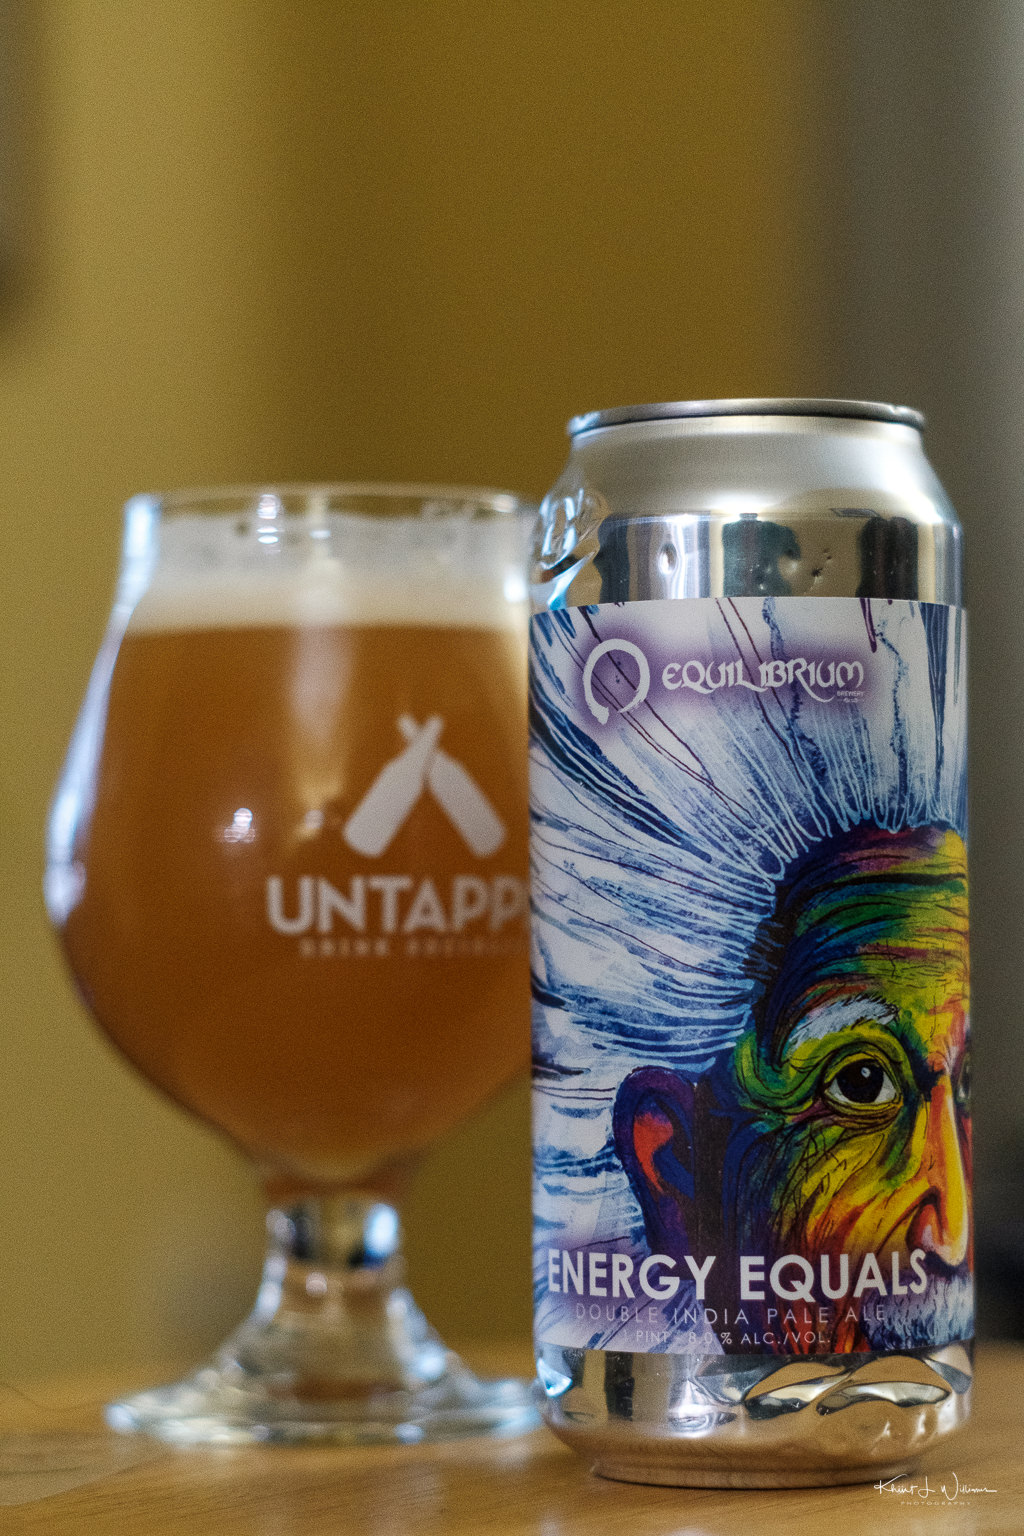 Energy Equals by Equilibrium Brewery